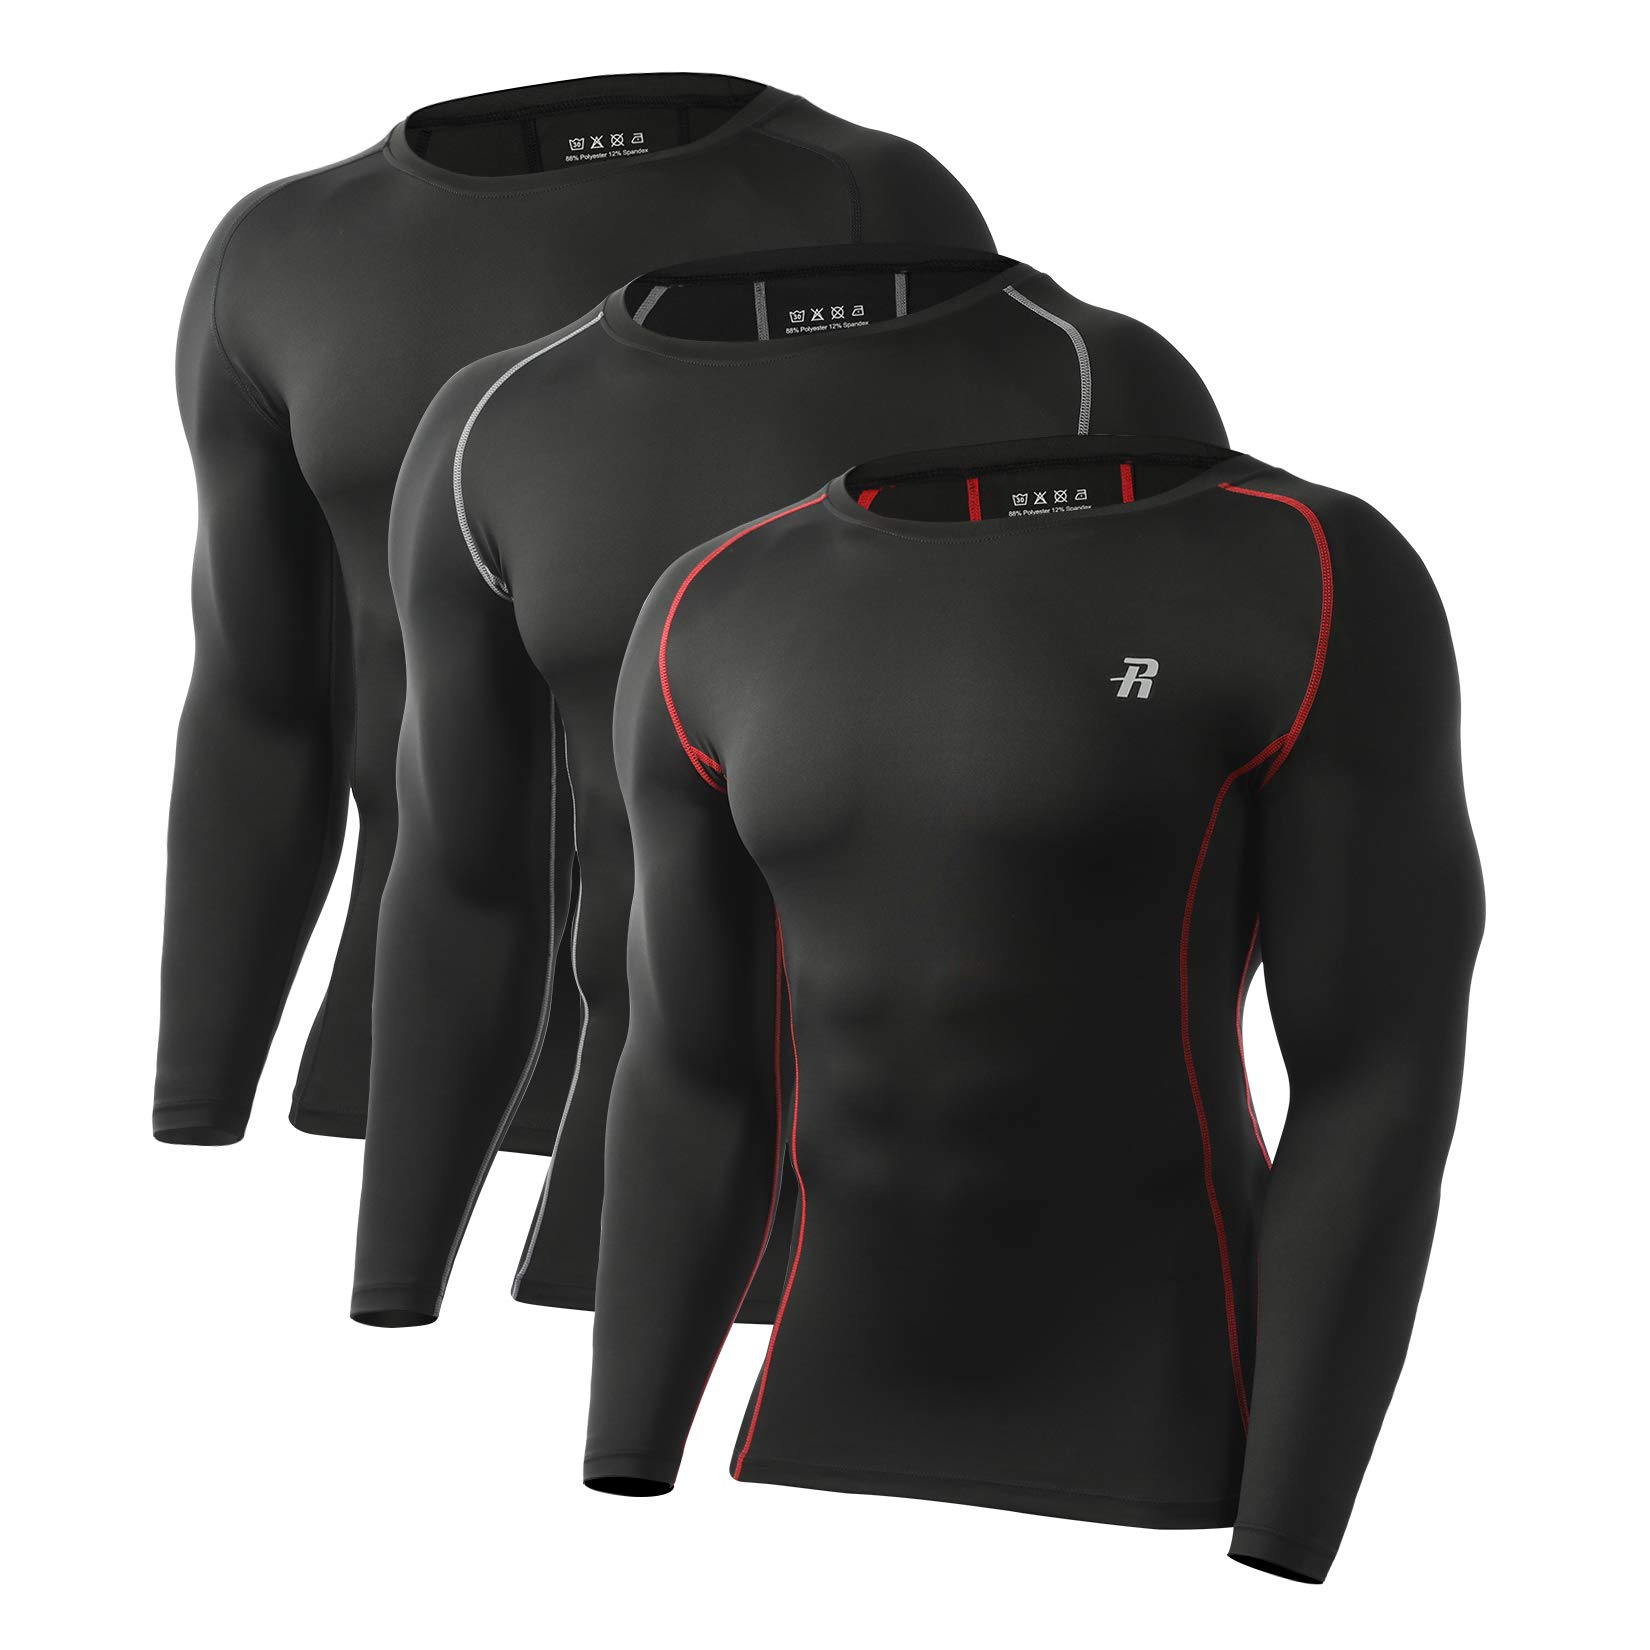 Runhit Compression Shirts for Men Long Sleeve Cool Dry Athletic